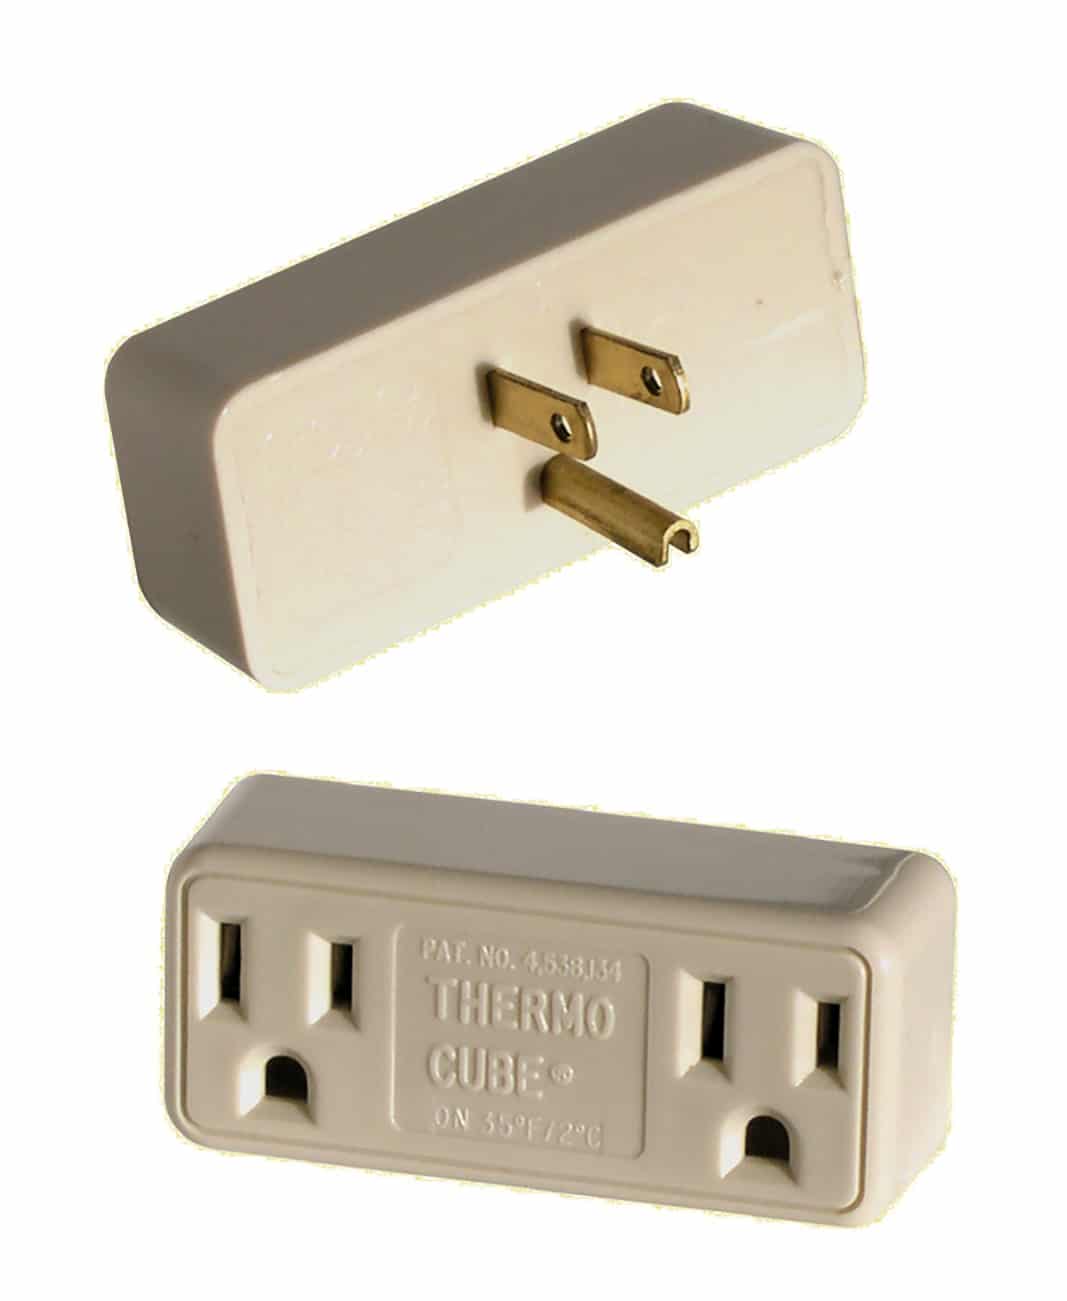 Thermostatically Controlled Outlet review